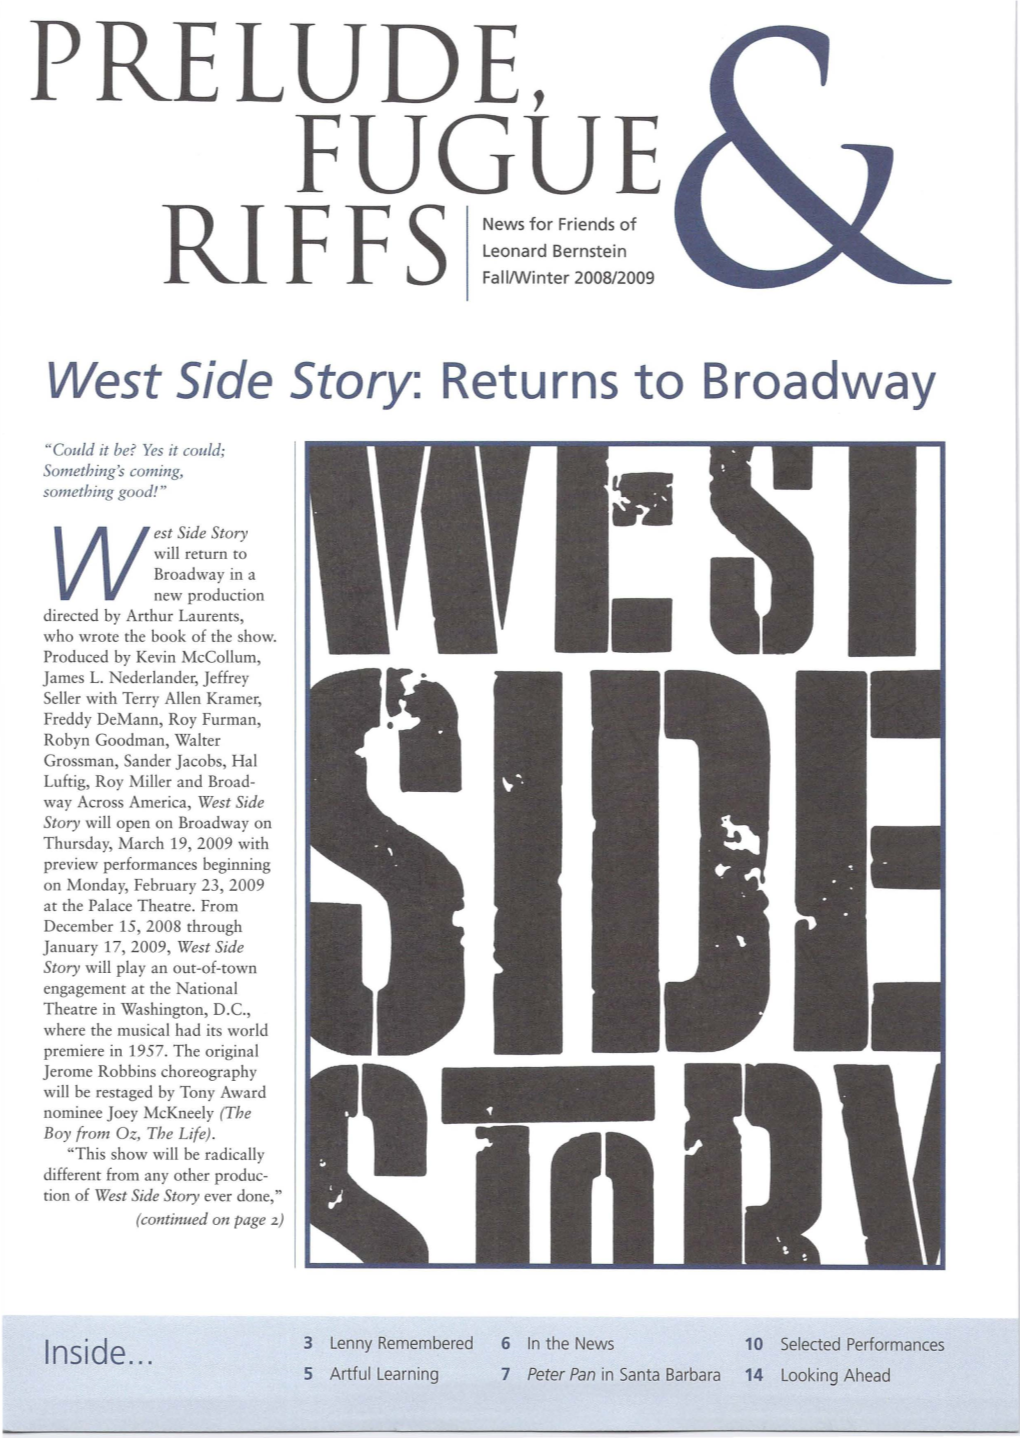 West Side Story: Returns to Broadway